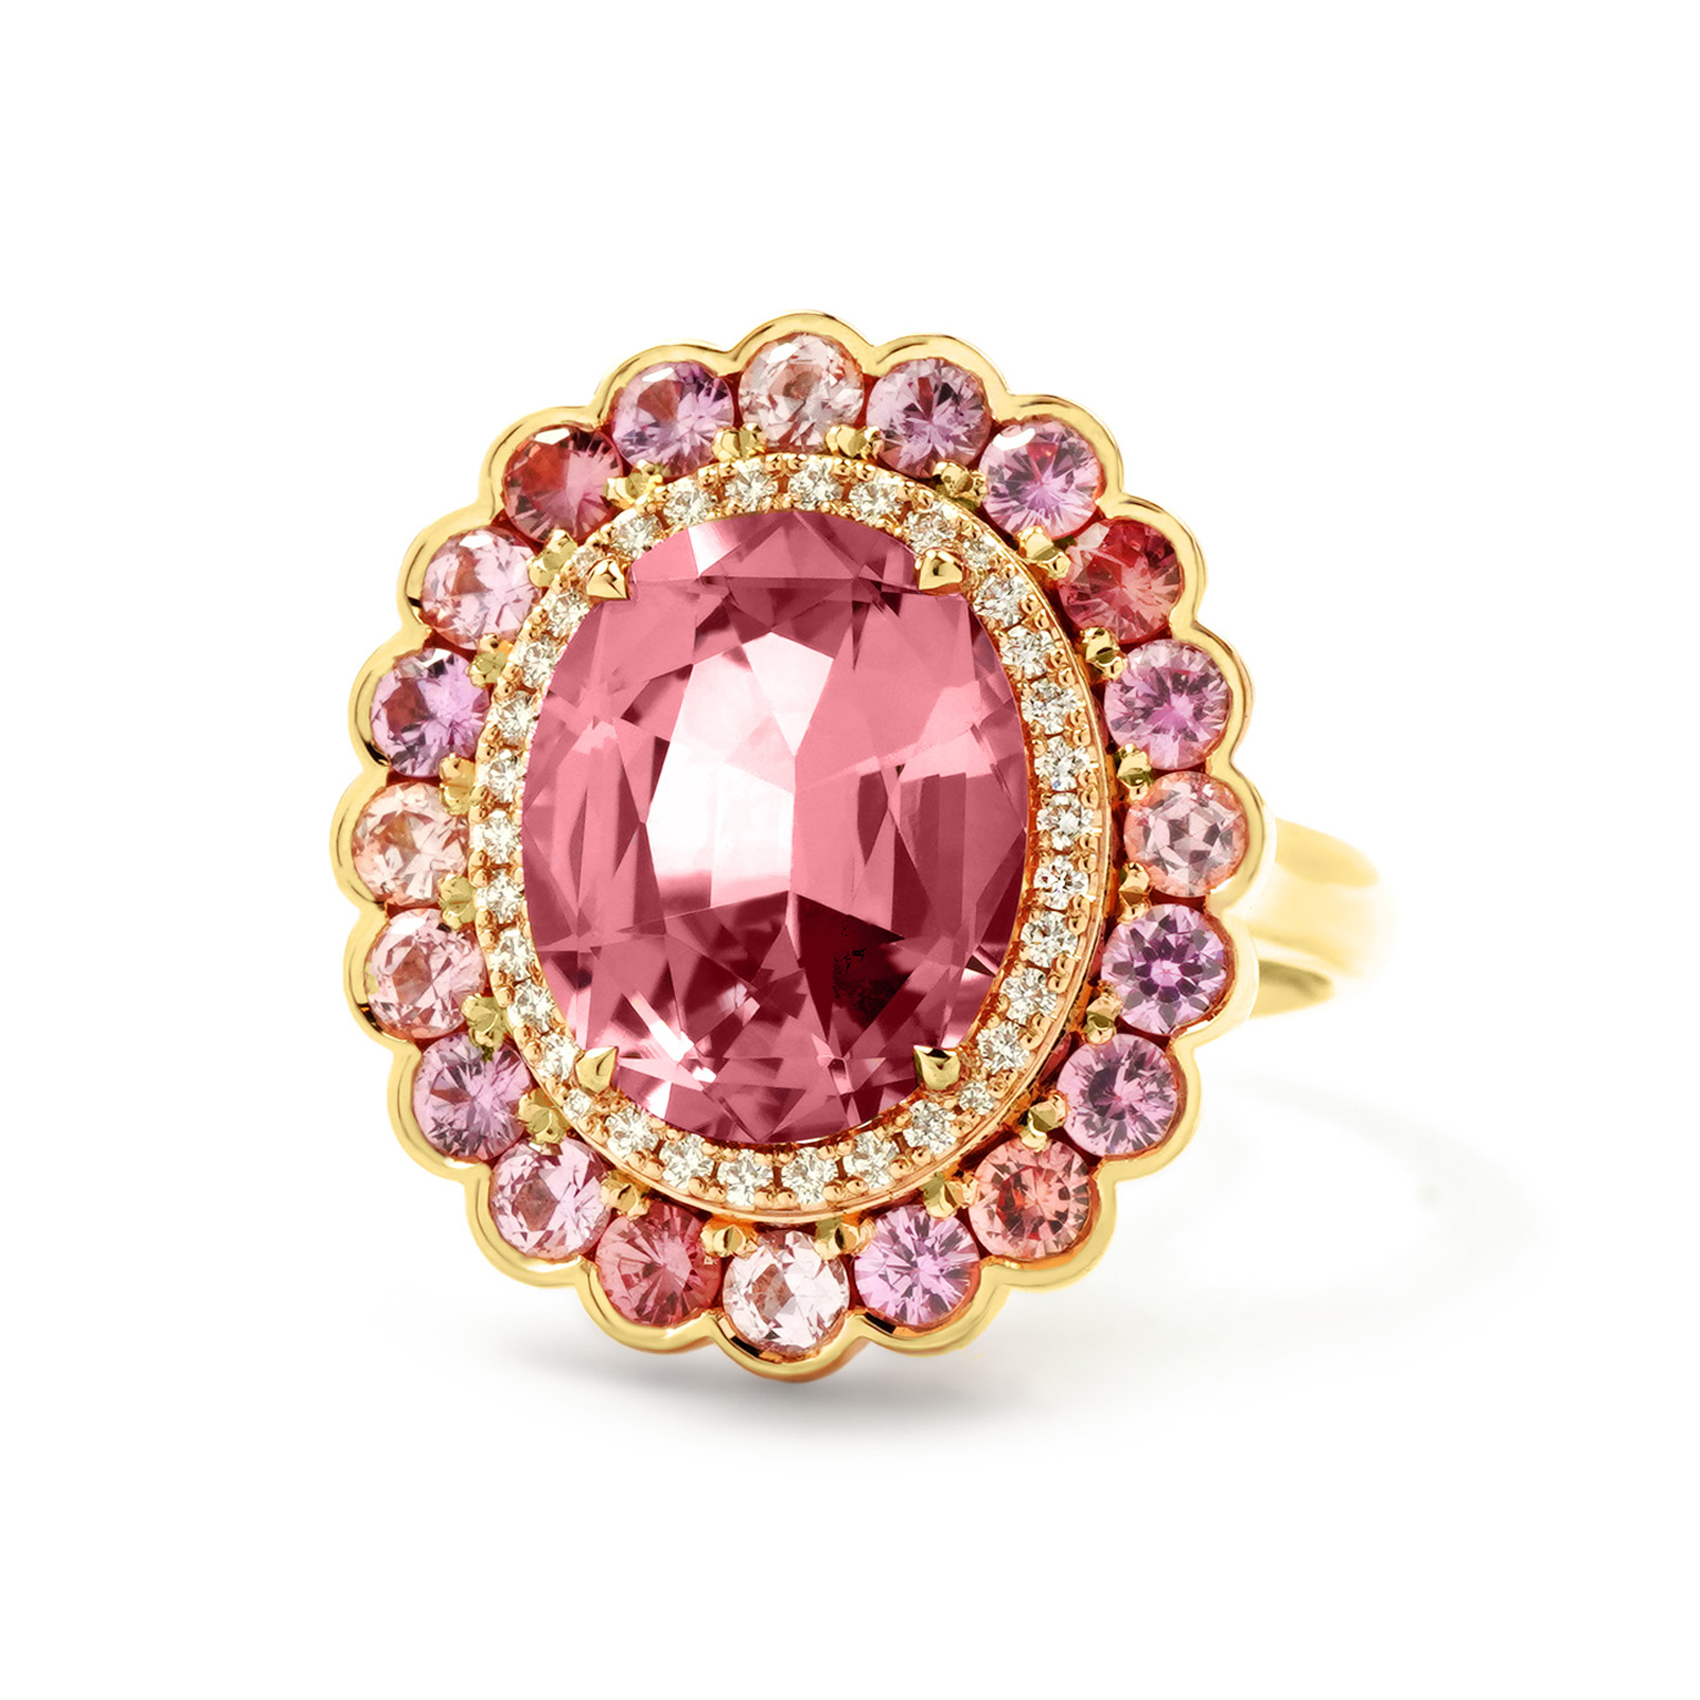 Belle Double Halo Oval Pink Tourmaline